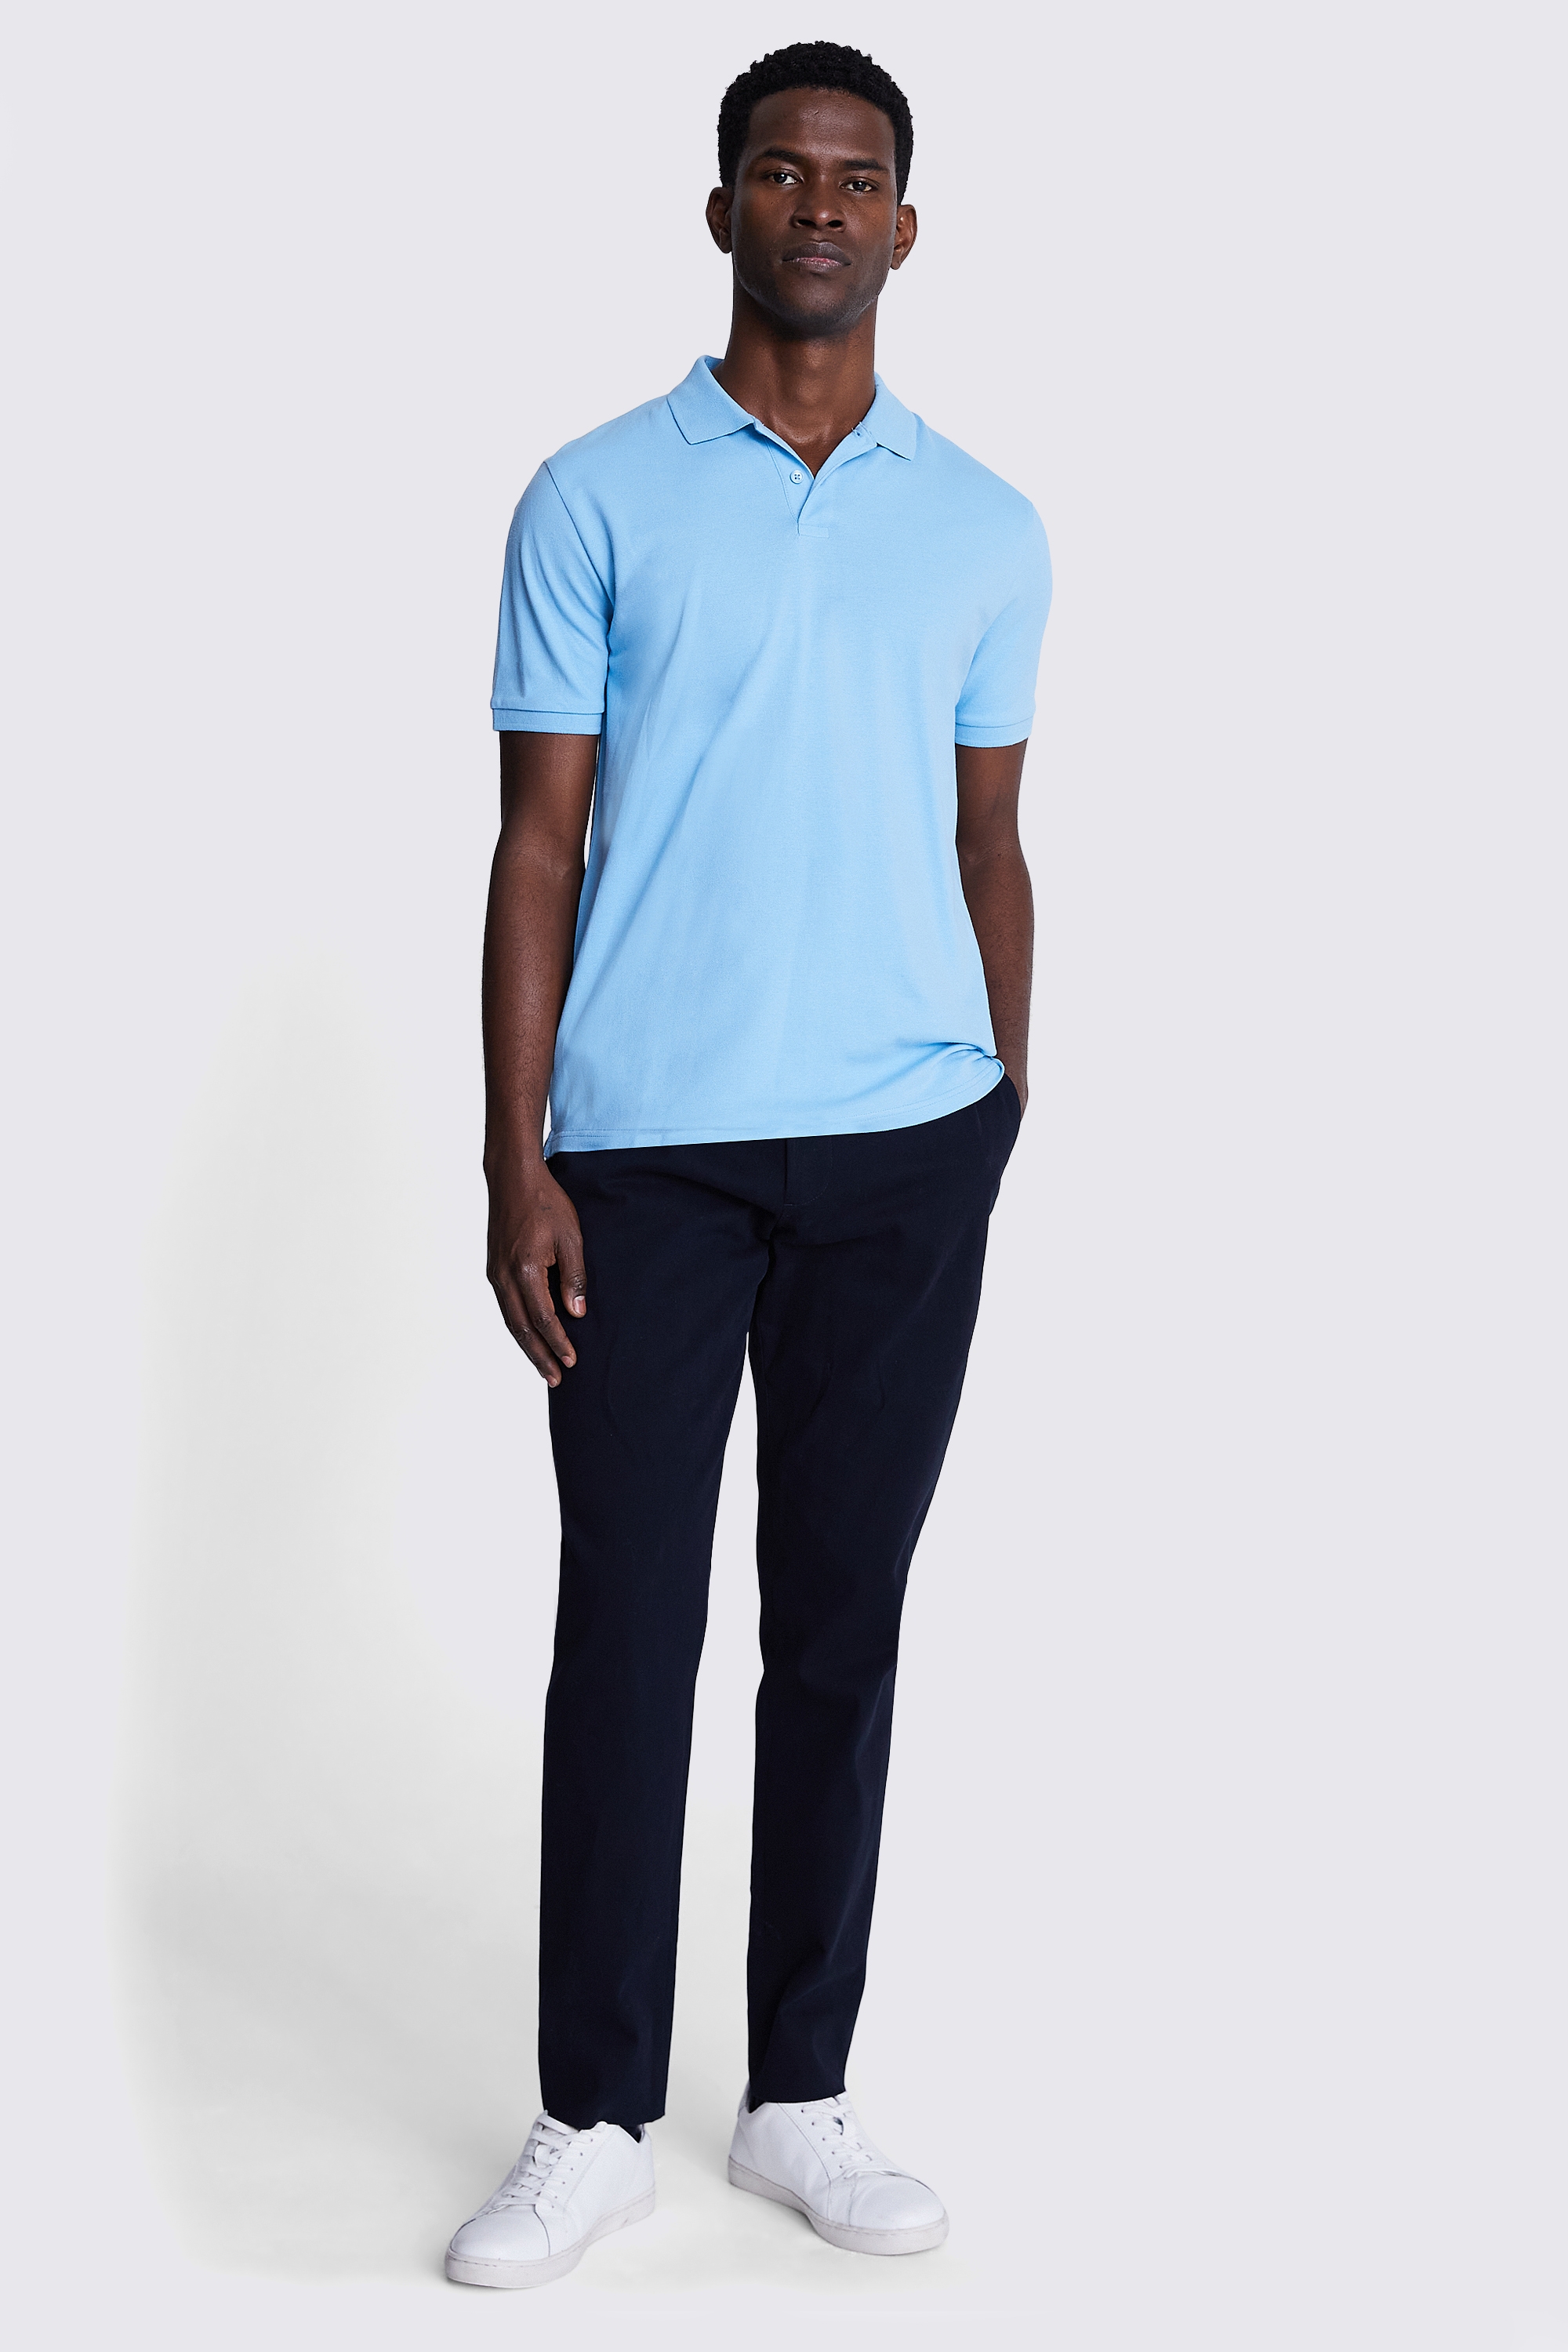 Blue Pique Polo Shirt | Buy Online at Moss